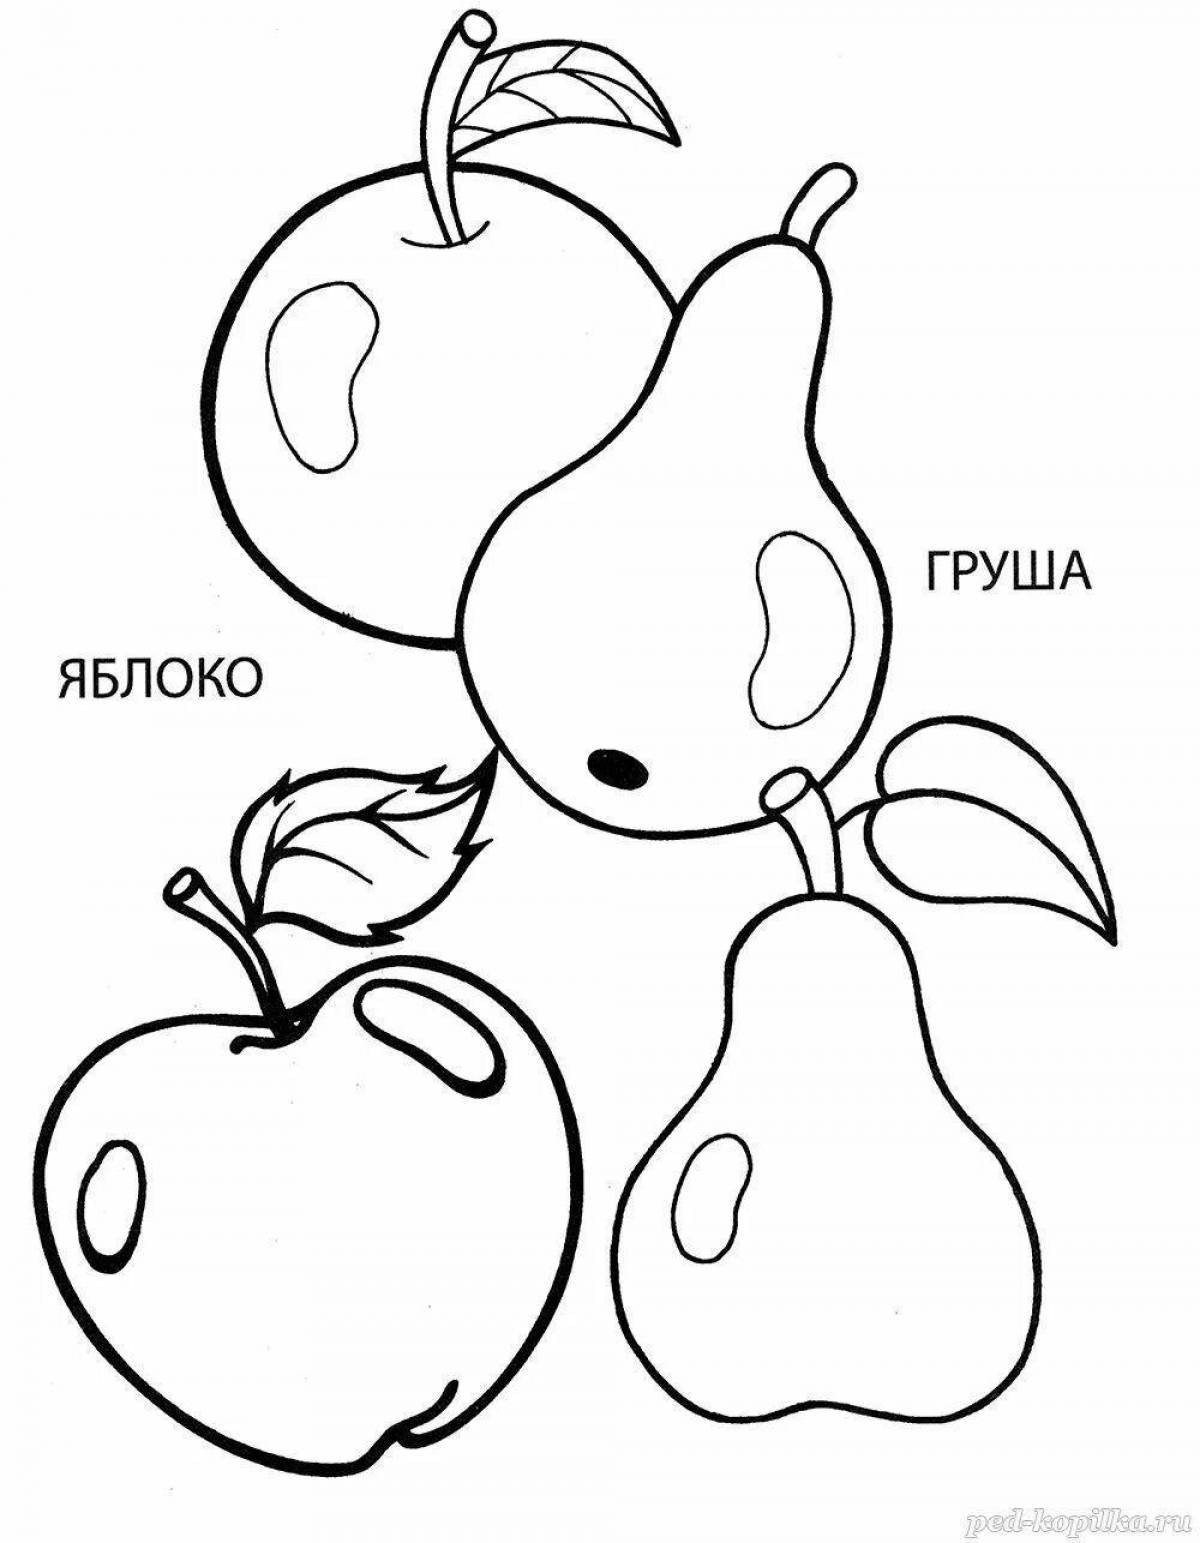 Commemorative apple and pear coloring page